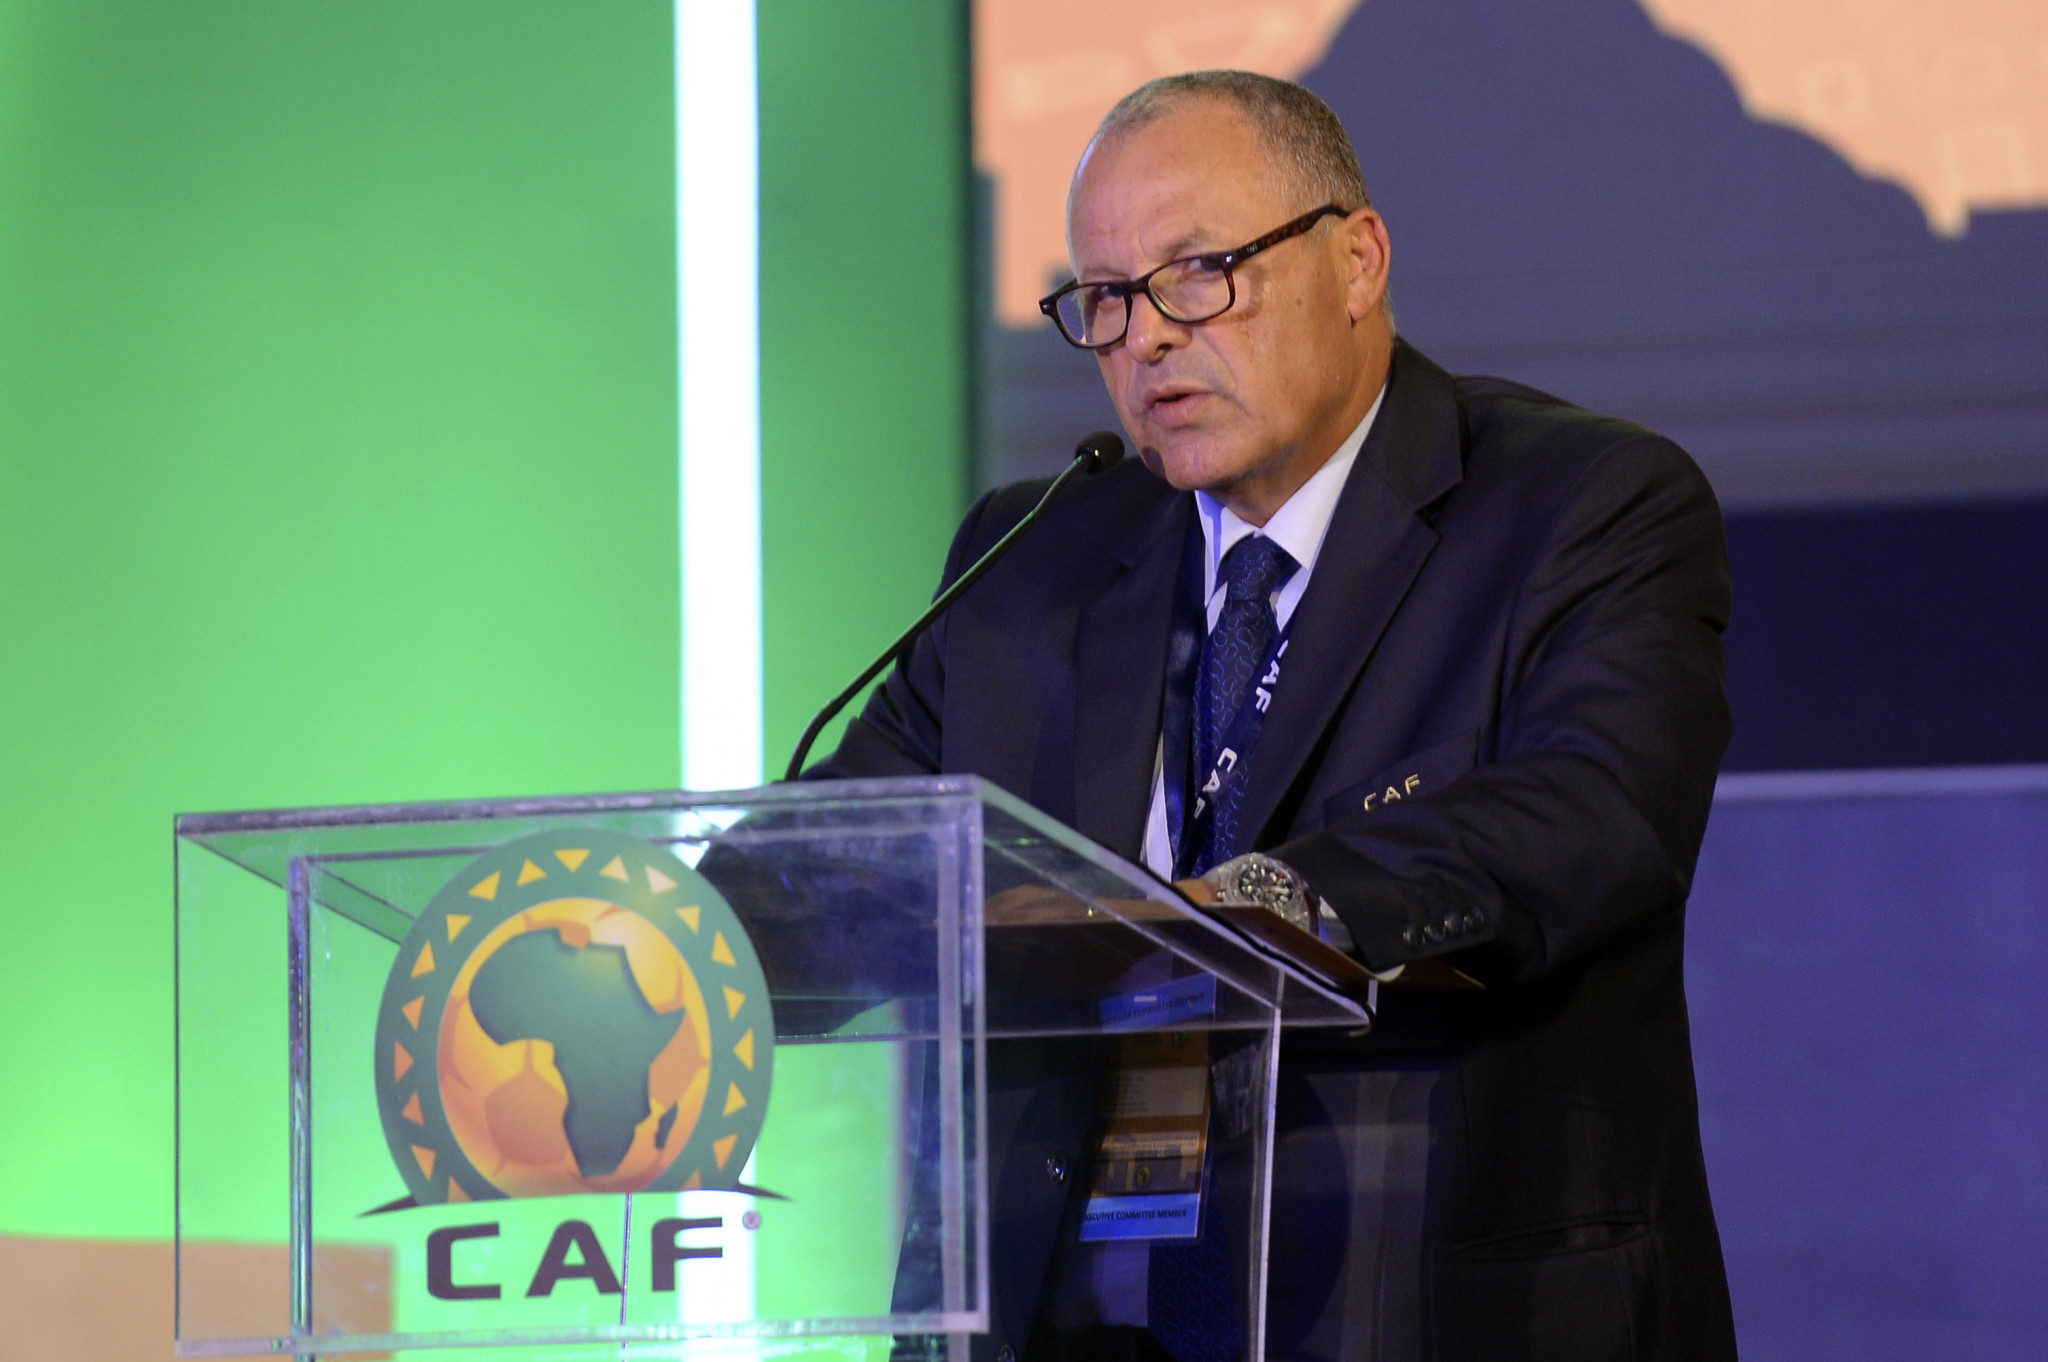 FIFA has decided to appoint a Normalisation Committee for the Egyptian Football Association following the recent resignation of its President Hany Abou Rida, pictured, and its entire Board ©Getty Images